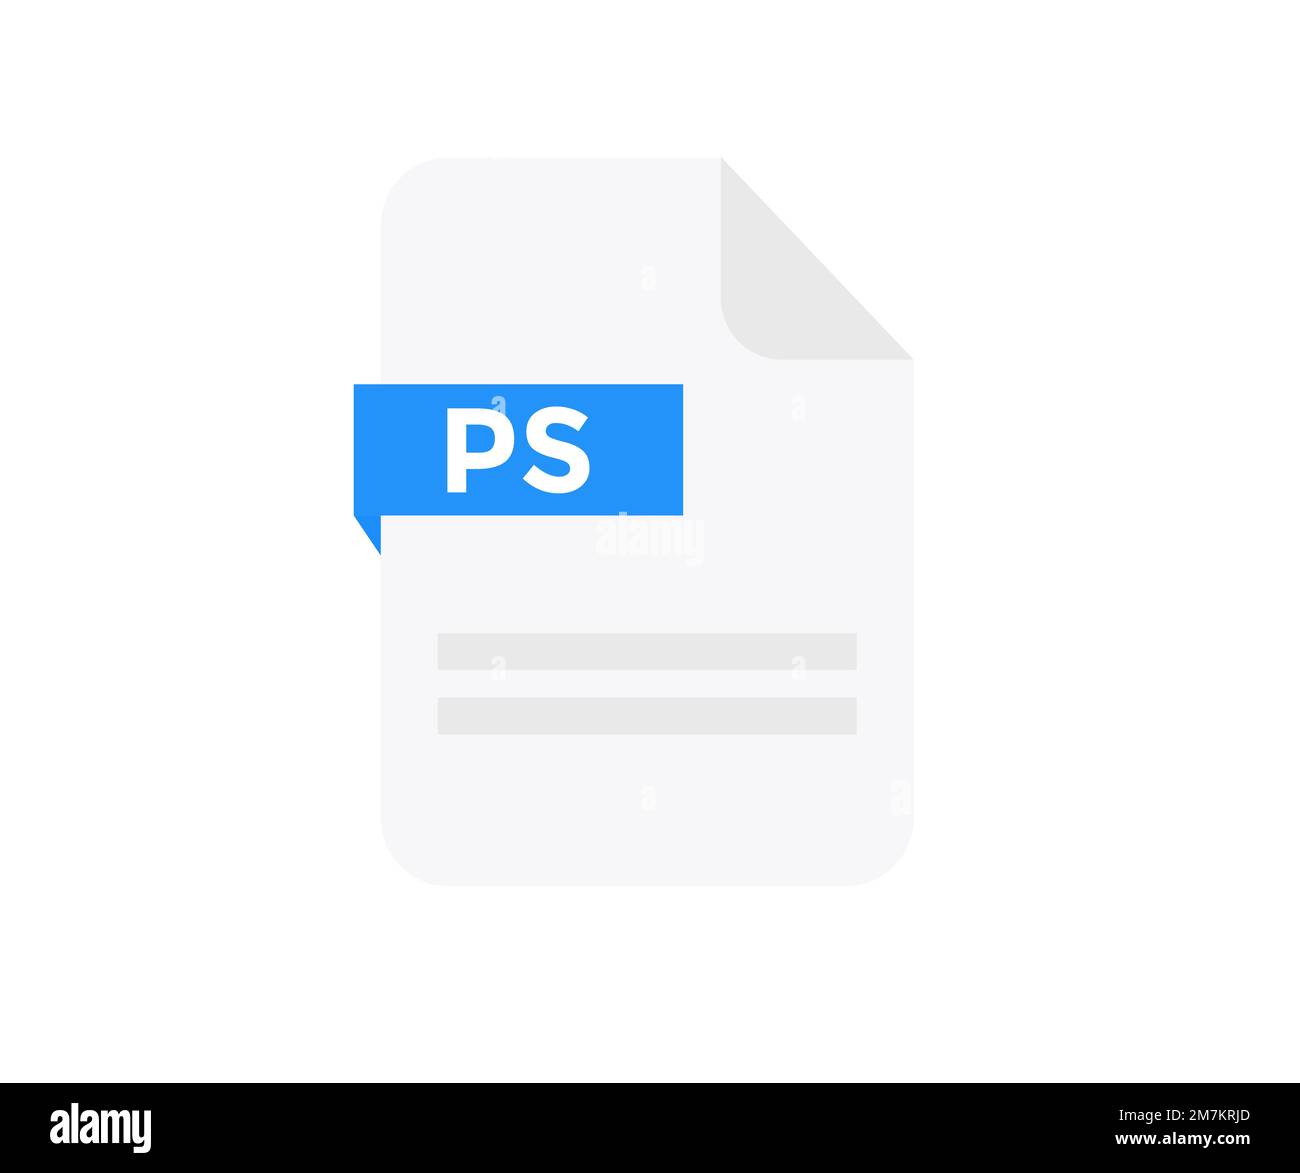 File format PS logo design. Document file icon, internet, extension, sign, type, presentation, graphic, application. Stock Vector